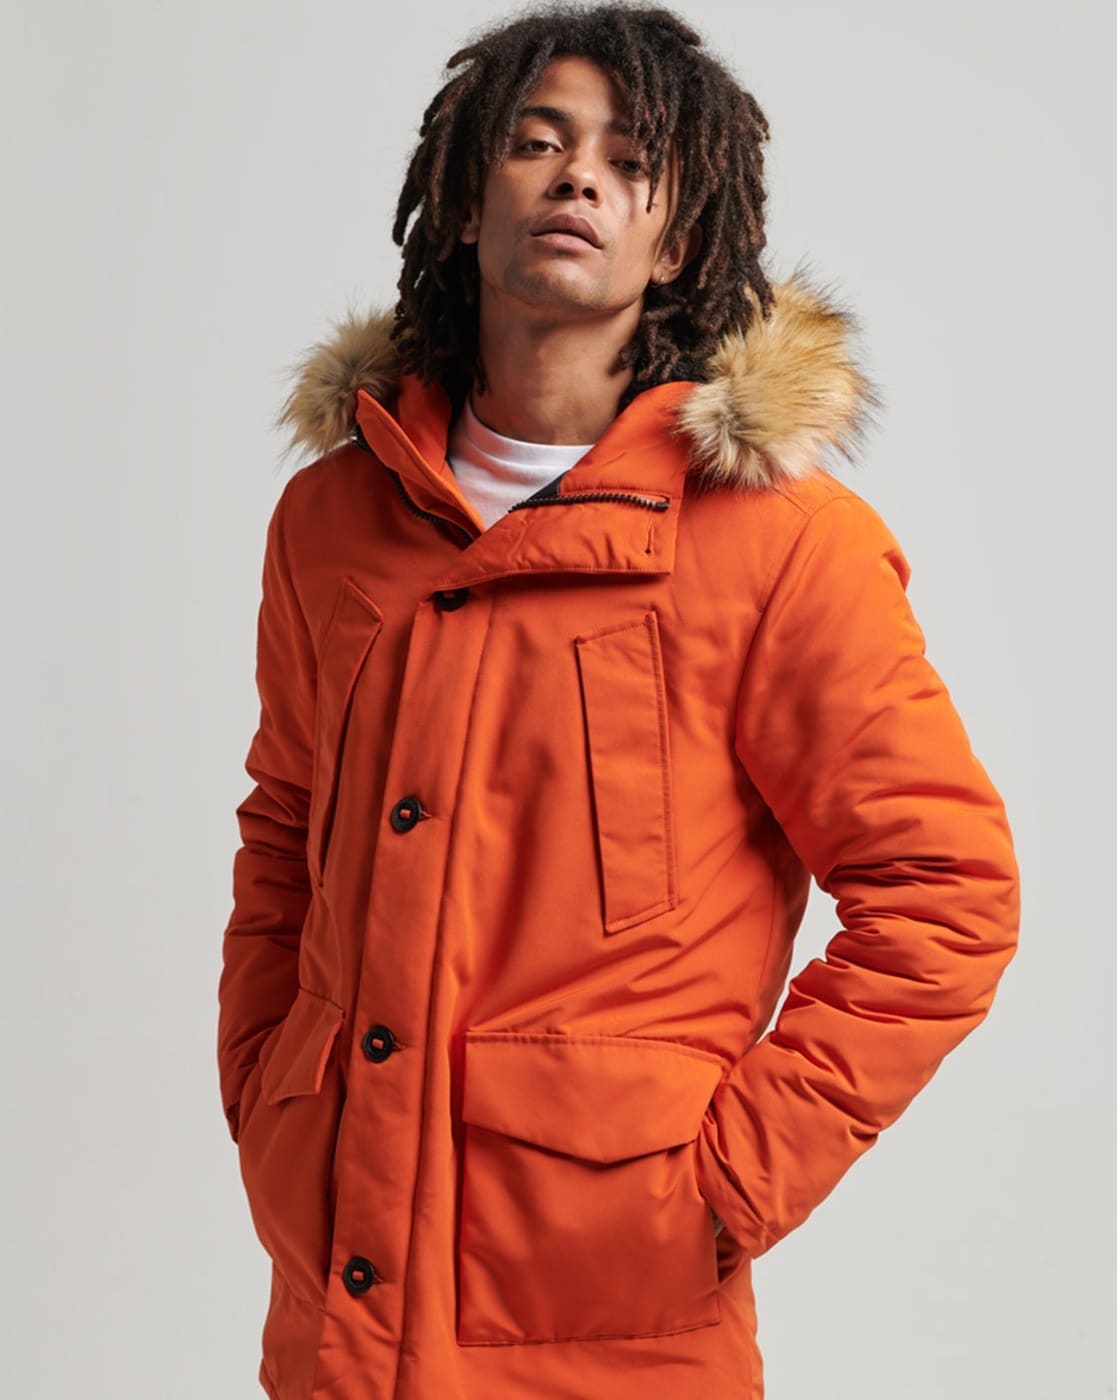 Club Room Men's Parka with a Faux Fur-Hood Jacket, Created for Macy's -  Macy's